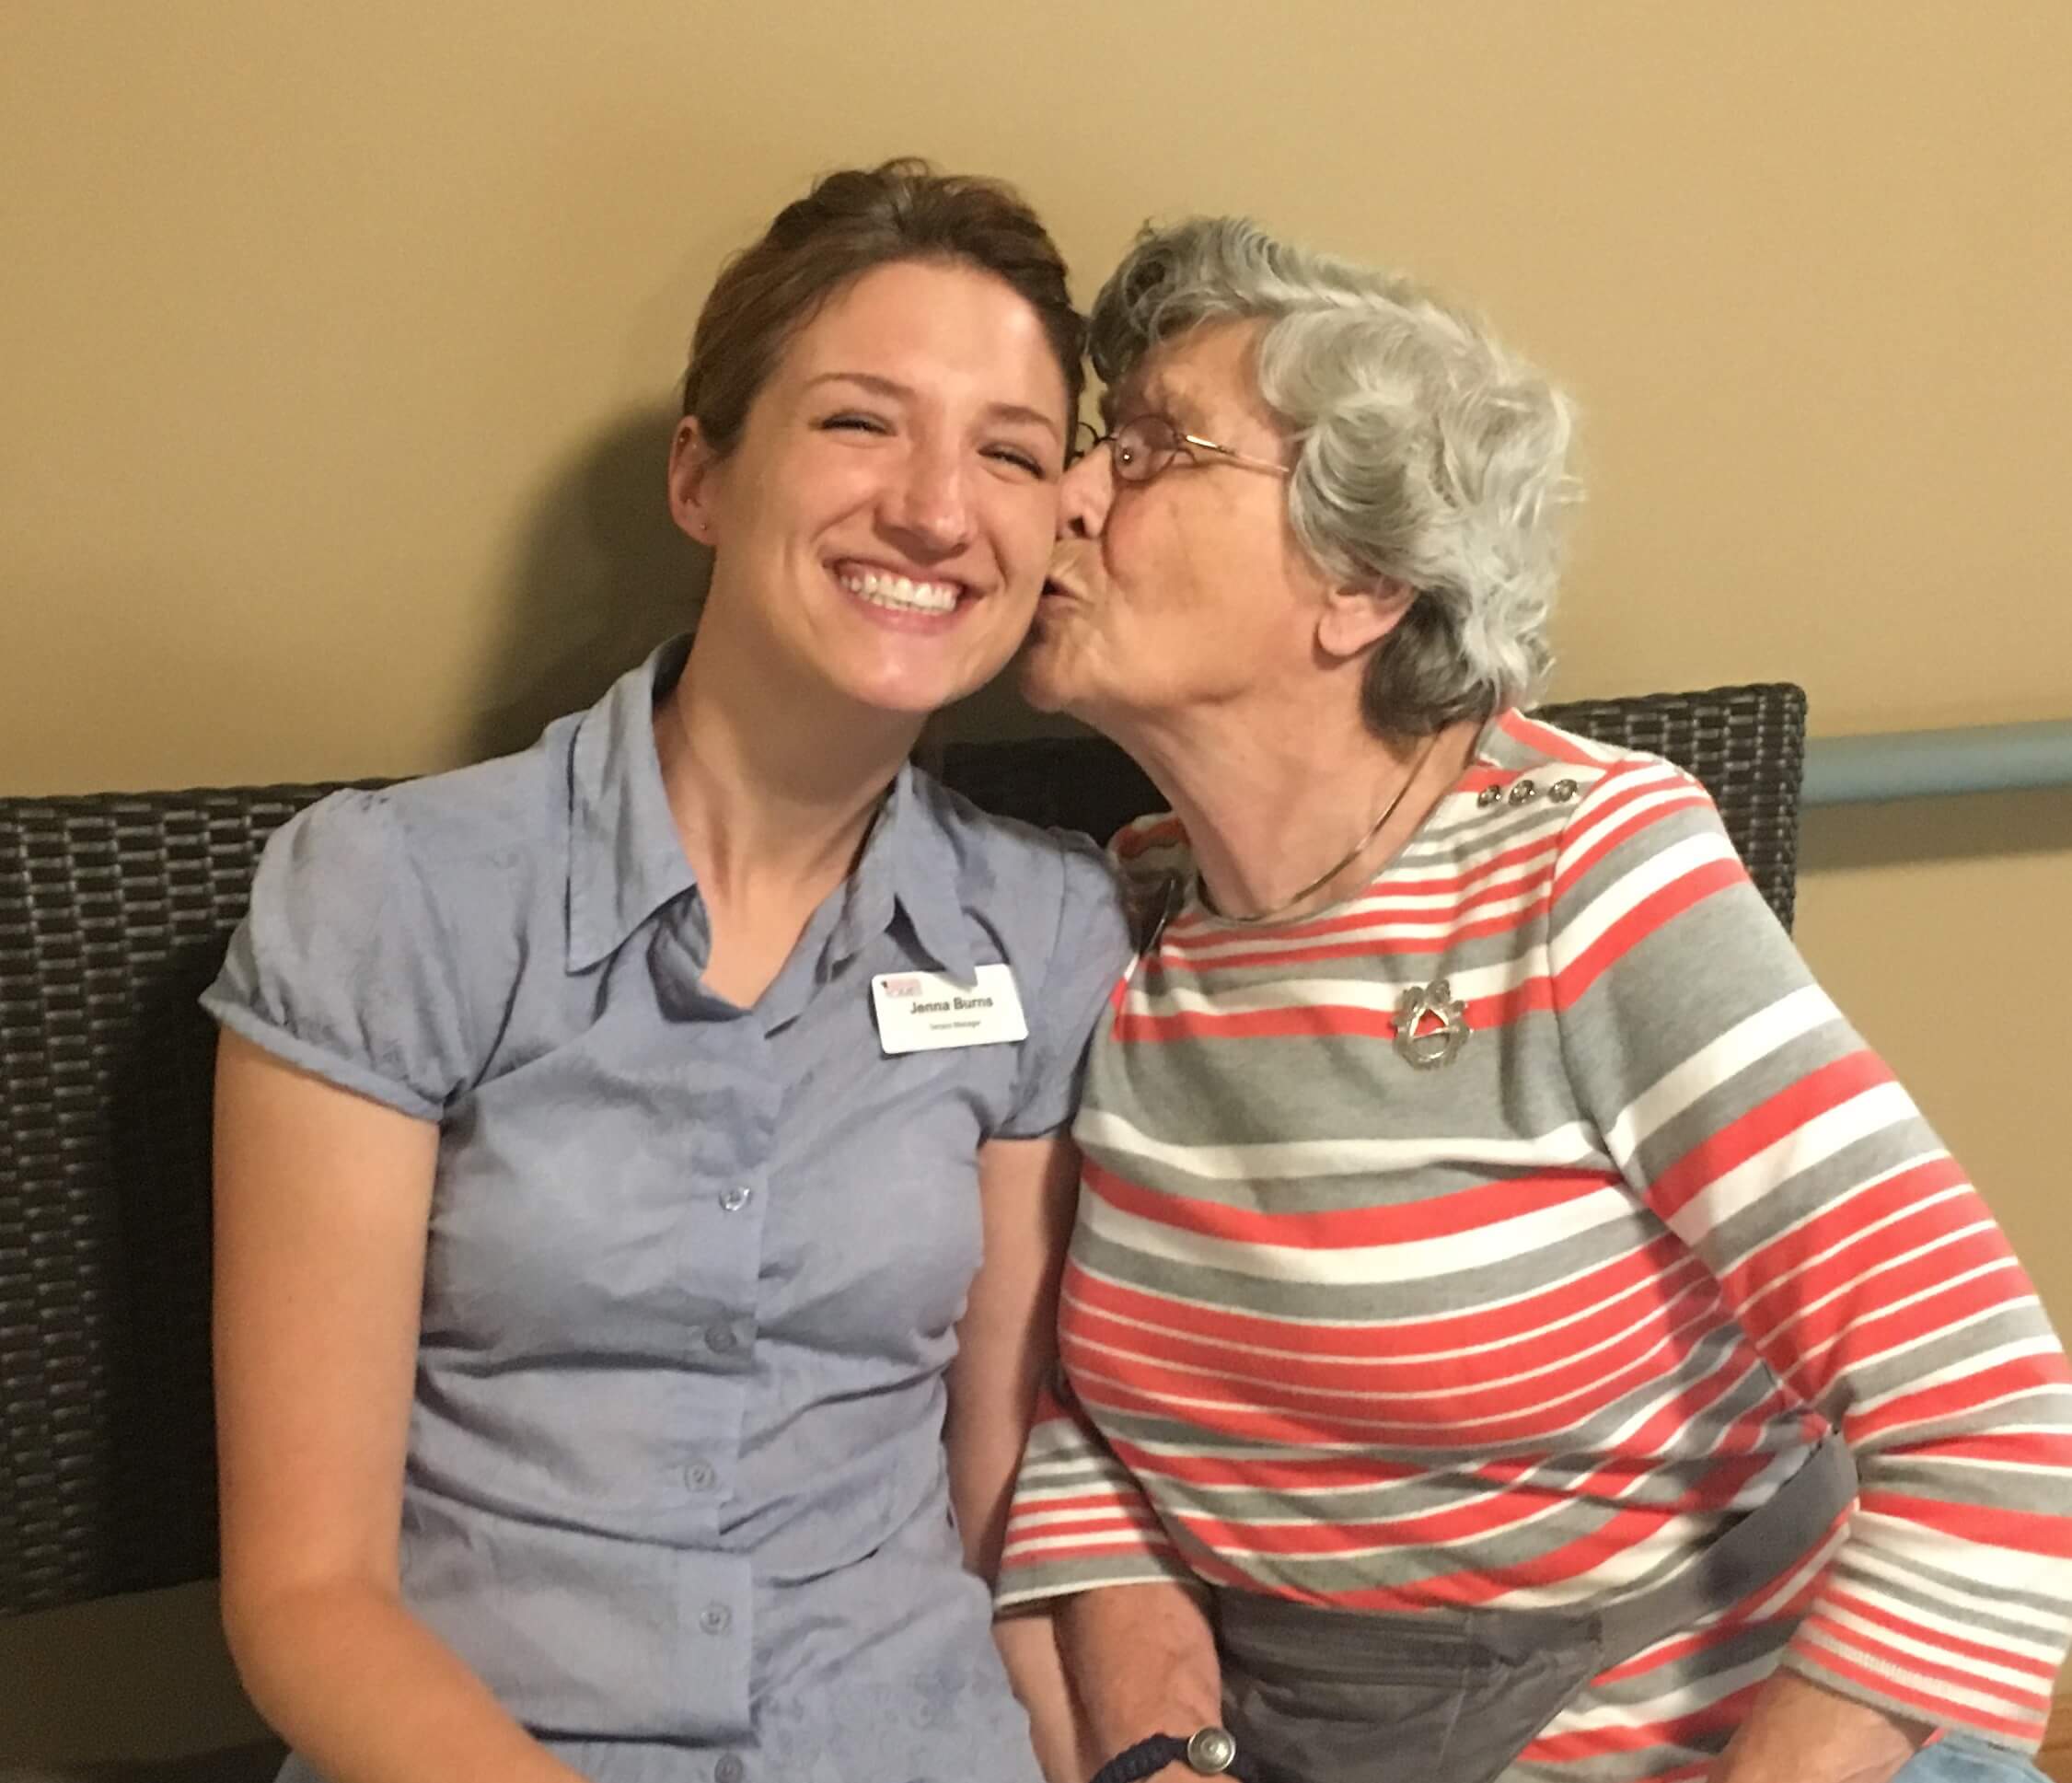 KSU alumna Jenna Kilawee smiles great big while holding hands with an older woman who's kissing her on the cheek.  They are seated on a bench in the facility where the young woman works and the older woman lives.